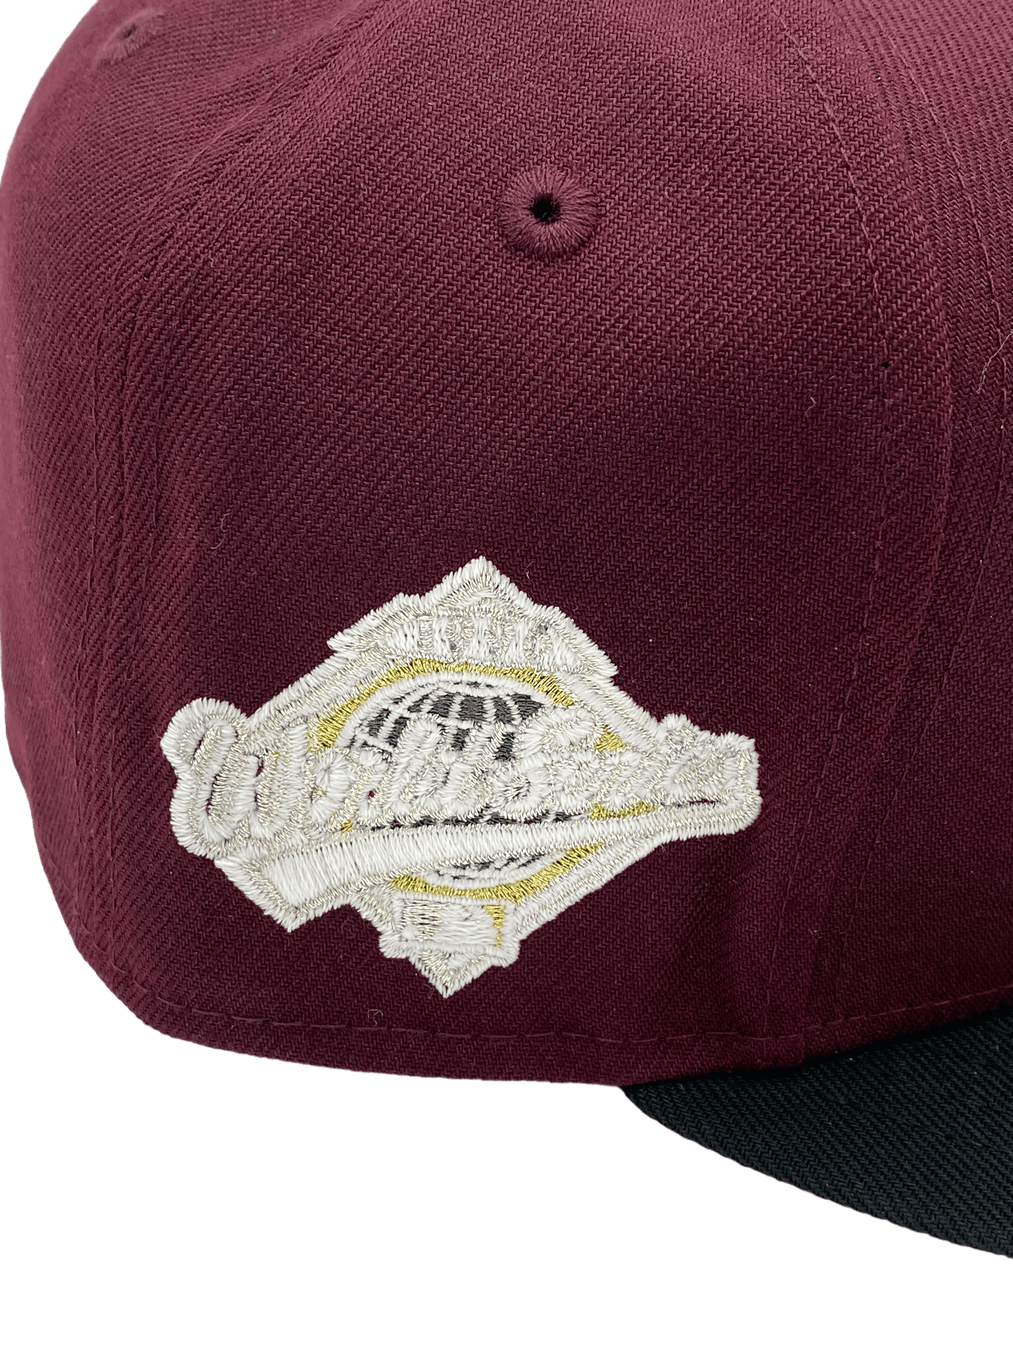 New Era Fitted Hat New York Yankees New Era Maroon VP3 Custom Side Patch 59FIFTY Fitted Hat - Men's